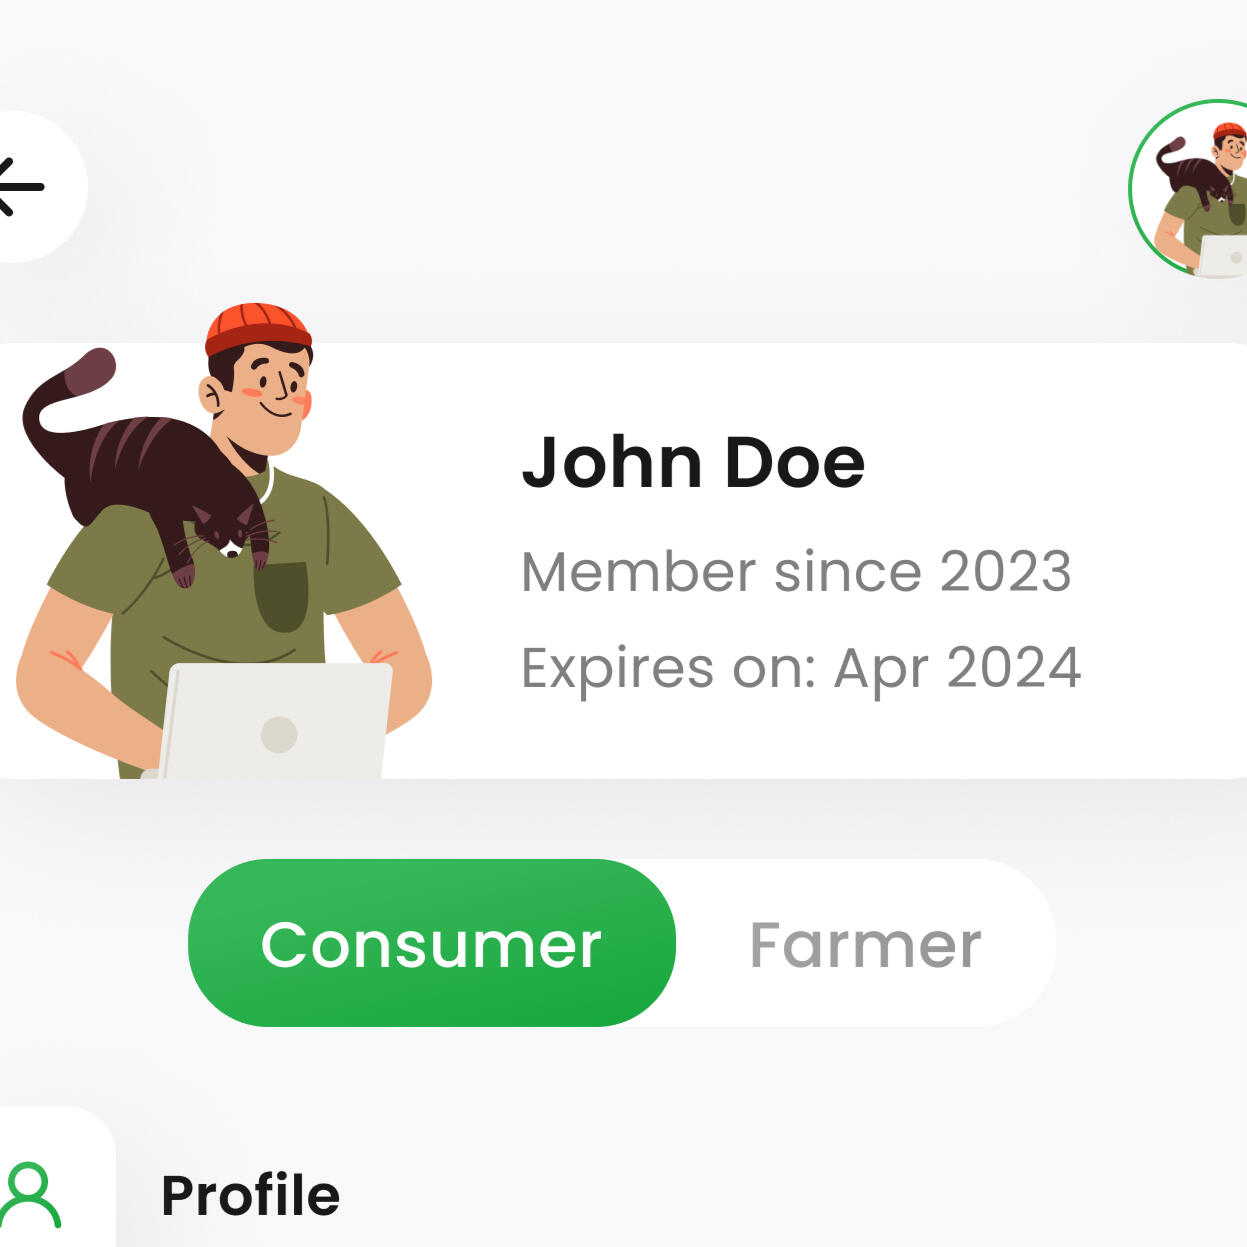 A screenshot of the user's profile showing their name, membership expiration date, and a convenient toggle between shopping and selling modes.